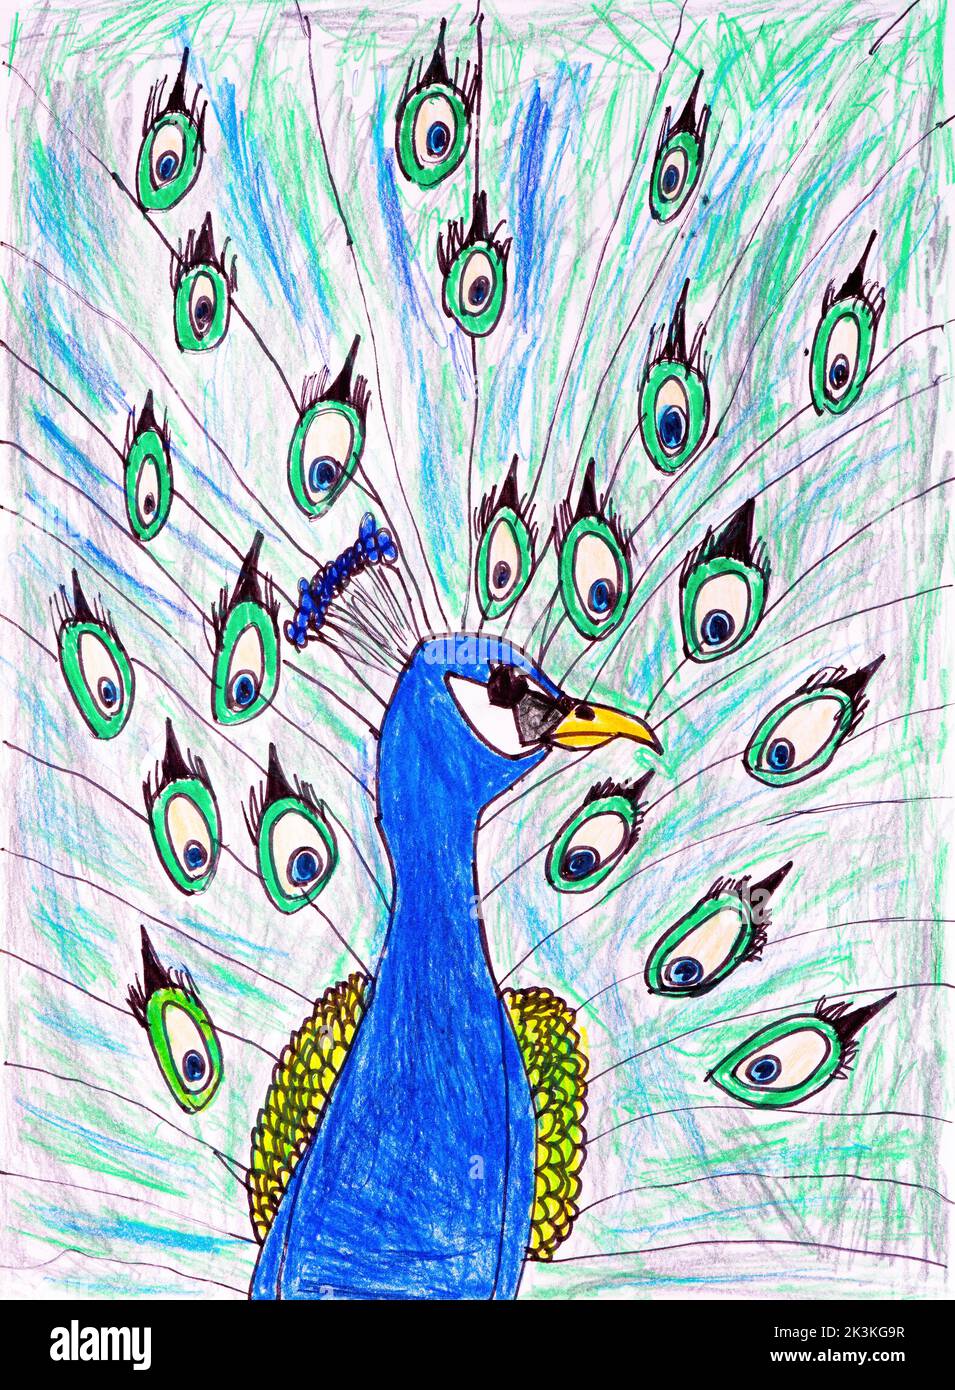 A pencil hand drawing of a peacock Stock Photo